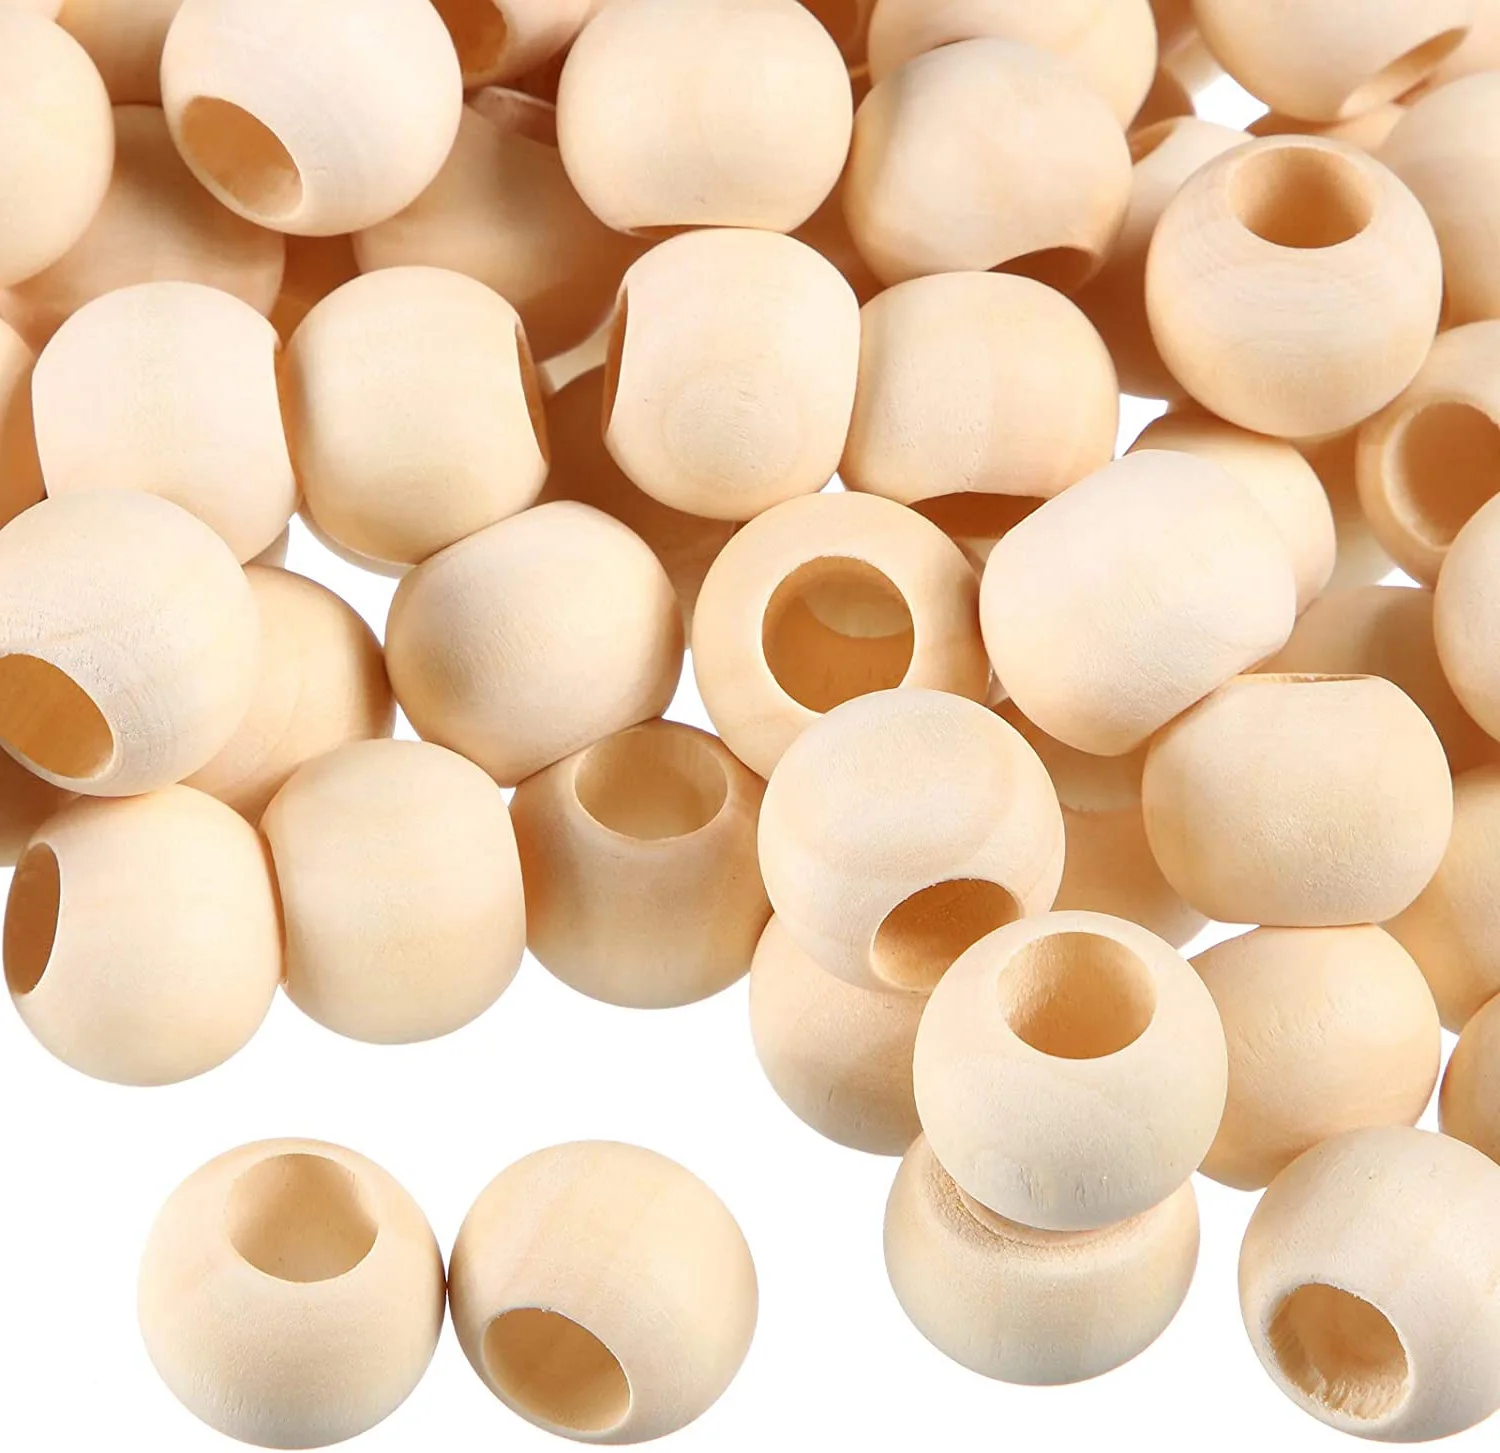 

Pandahall 20mm Large Hole Natural Wooden Beads Spacer Big Round Ball Unfinished Wood Beads for DIY Bracelet Jewelry Making Craft